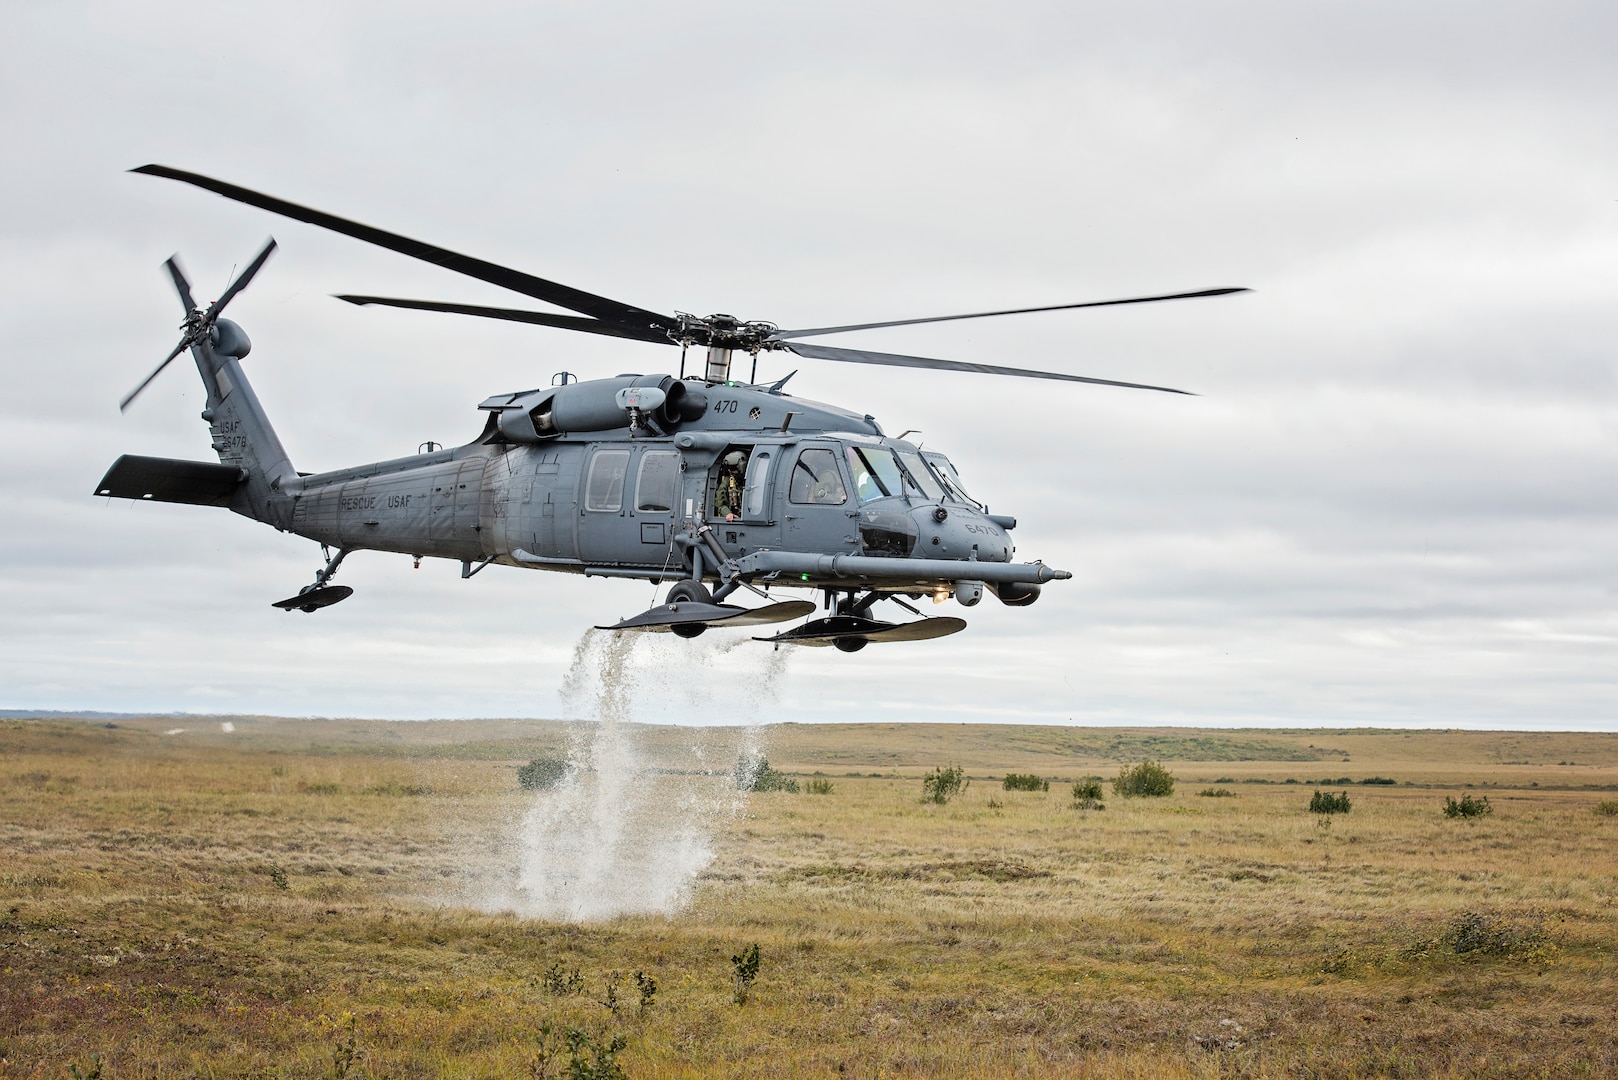 An HH-60 Pave Hawk helicopter from the 210th Rescue Squadron takes off from the tundra after loading simulated casualties during exercise Arctic Chinook, near Kotzebue, Alaska, Aug. 24, 2016.